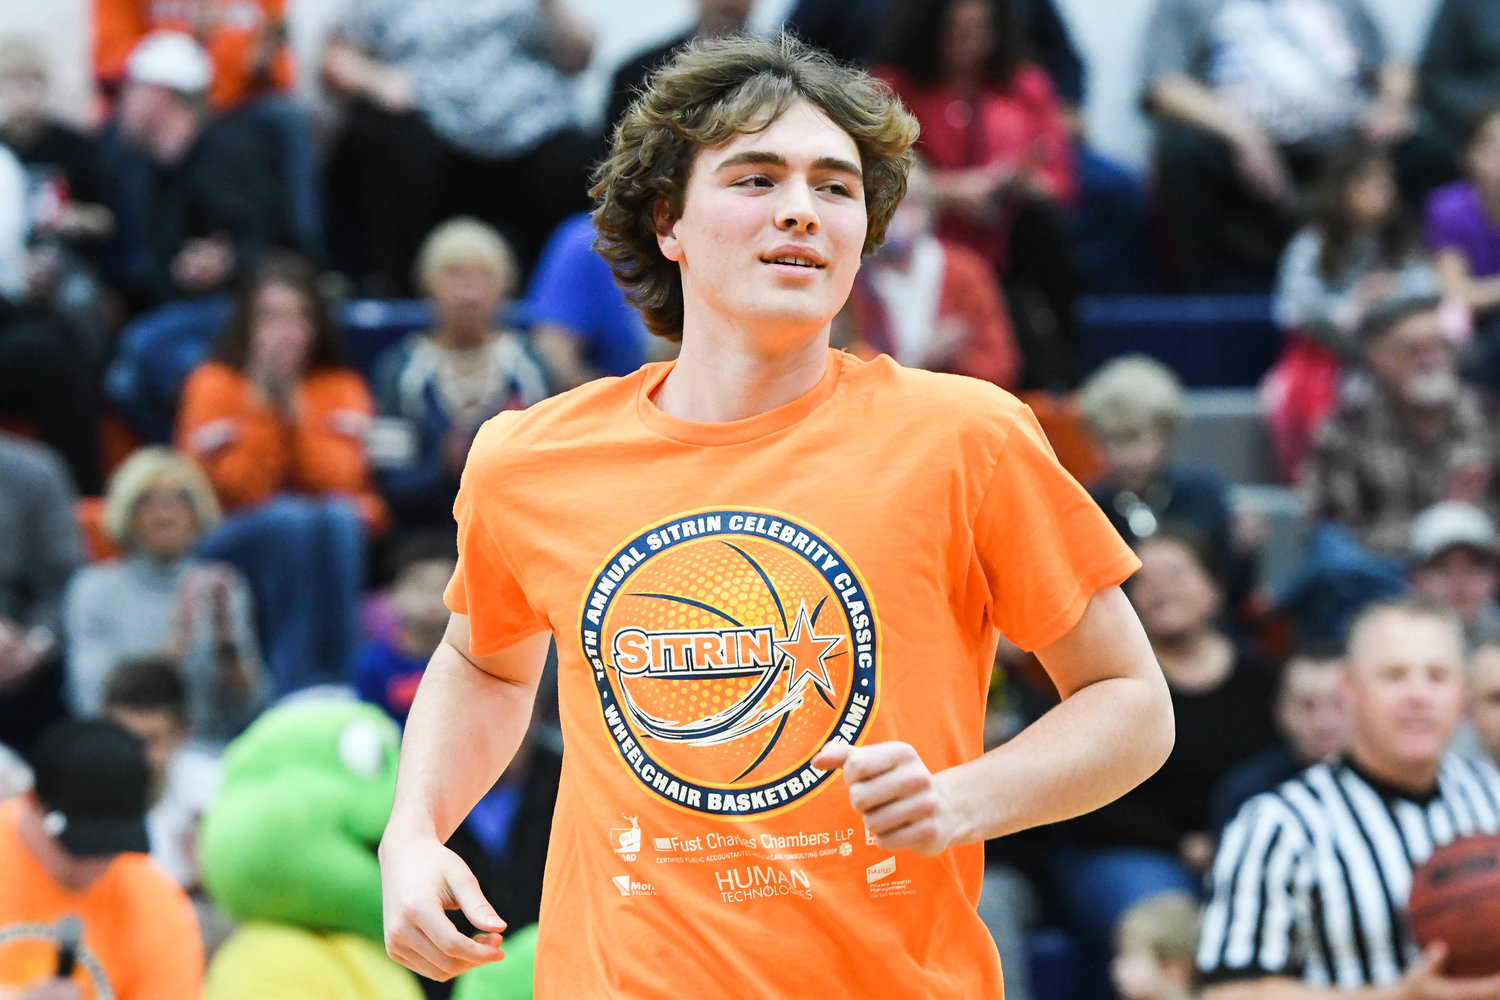 New Hartford senior basketball player Zach Philipkoski is announced to the court during the 18th annual Sitrin Celebrity Wheelchair Basketball Game on Thursday night at Utica University.